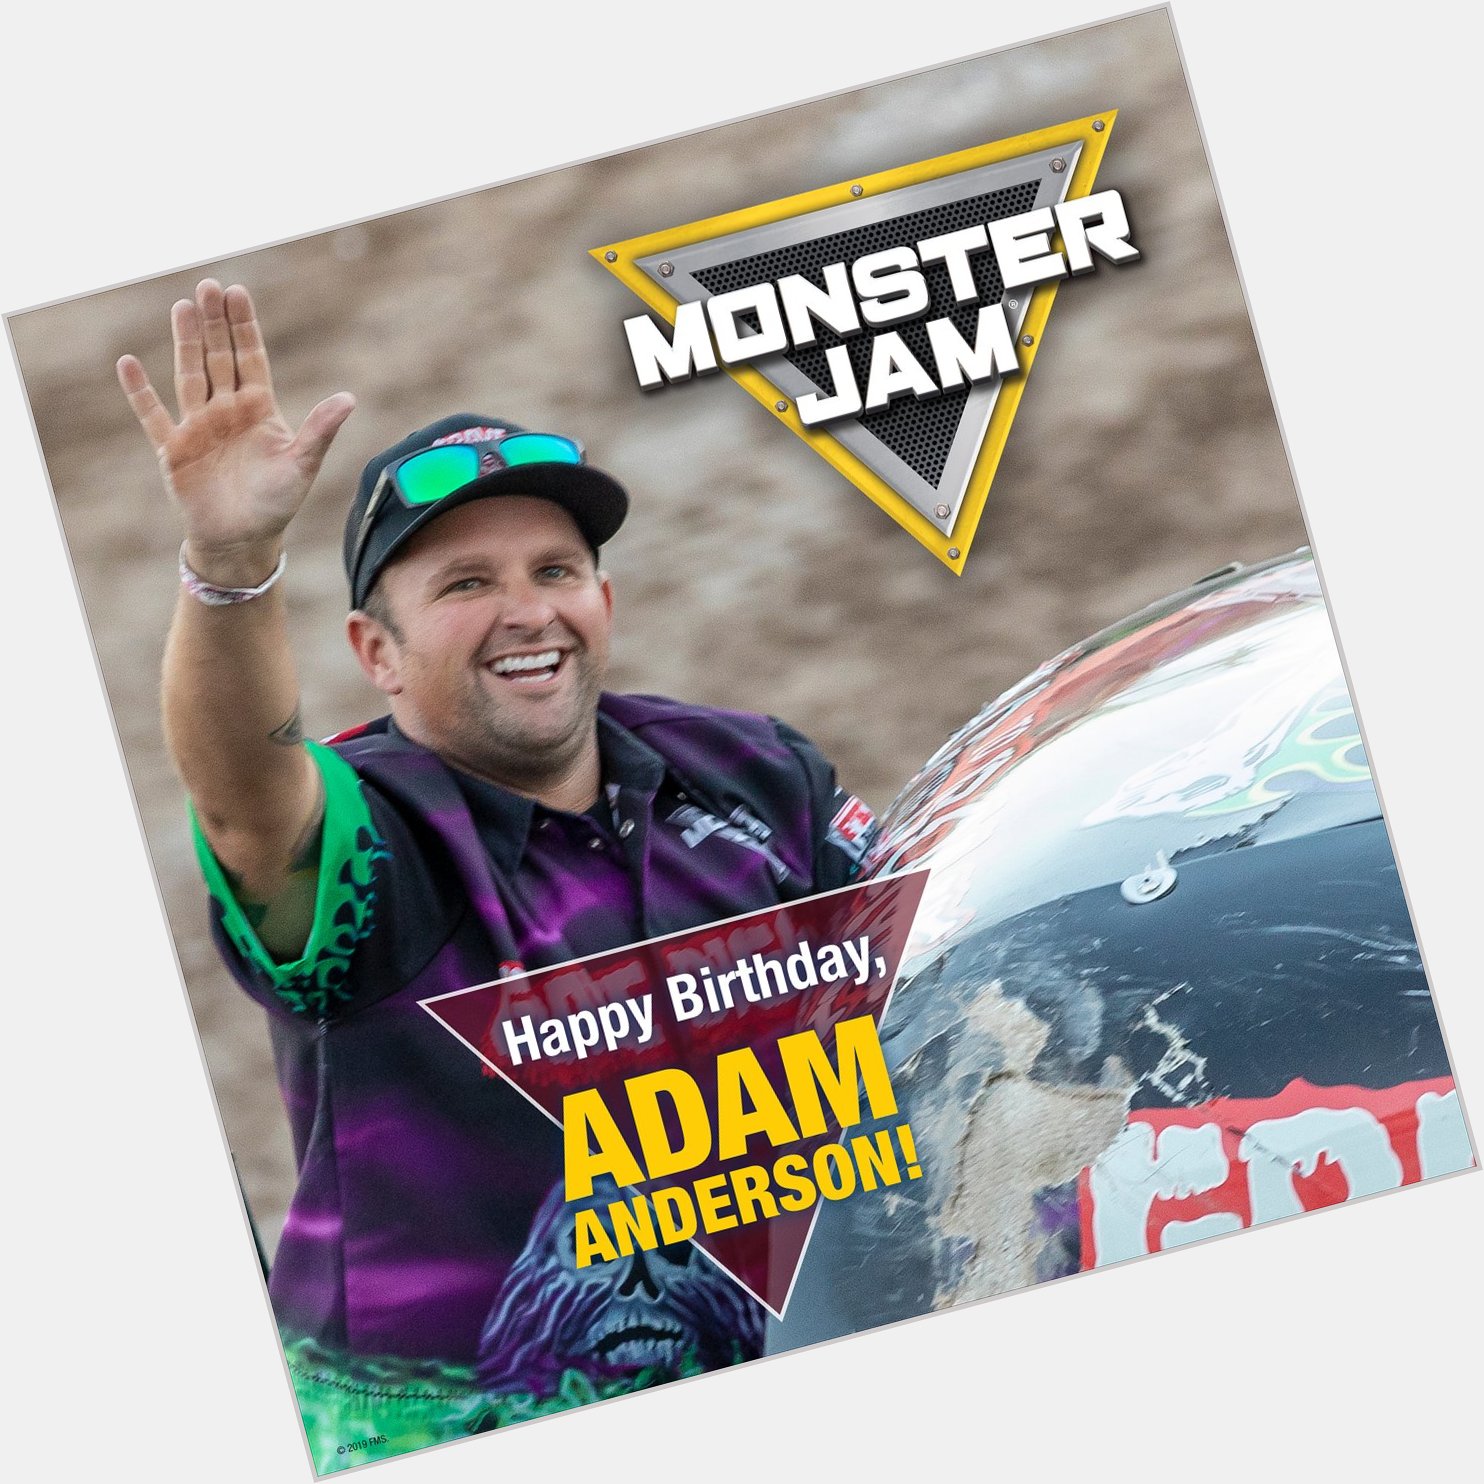 Everyone join us in wishing Adam Anderson a HAPPY BIRTHDAY!!   